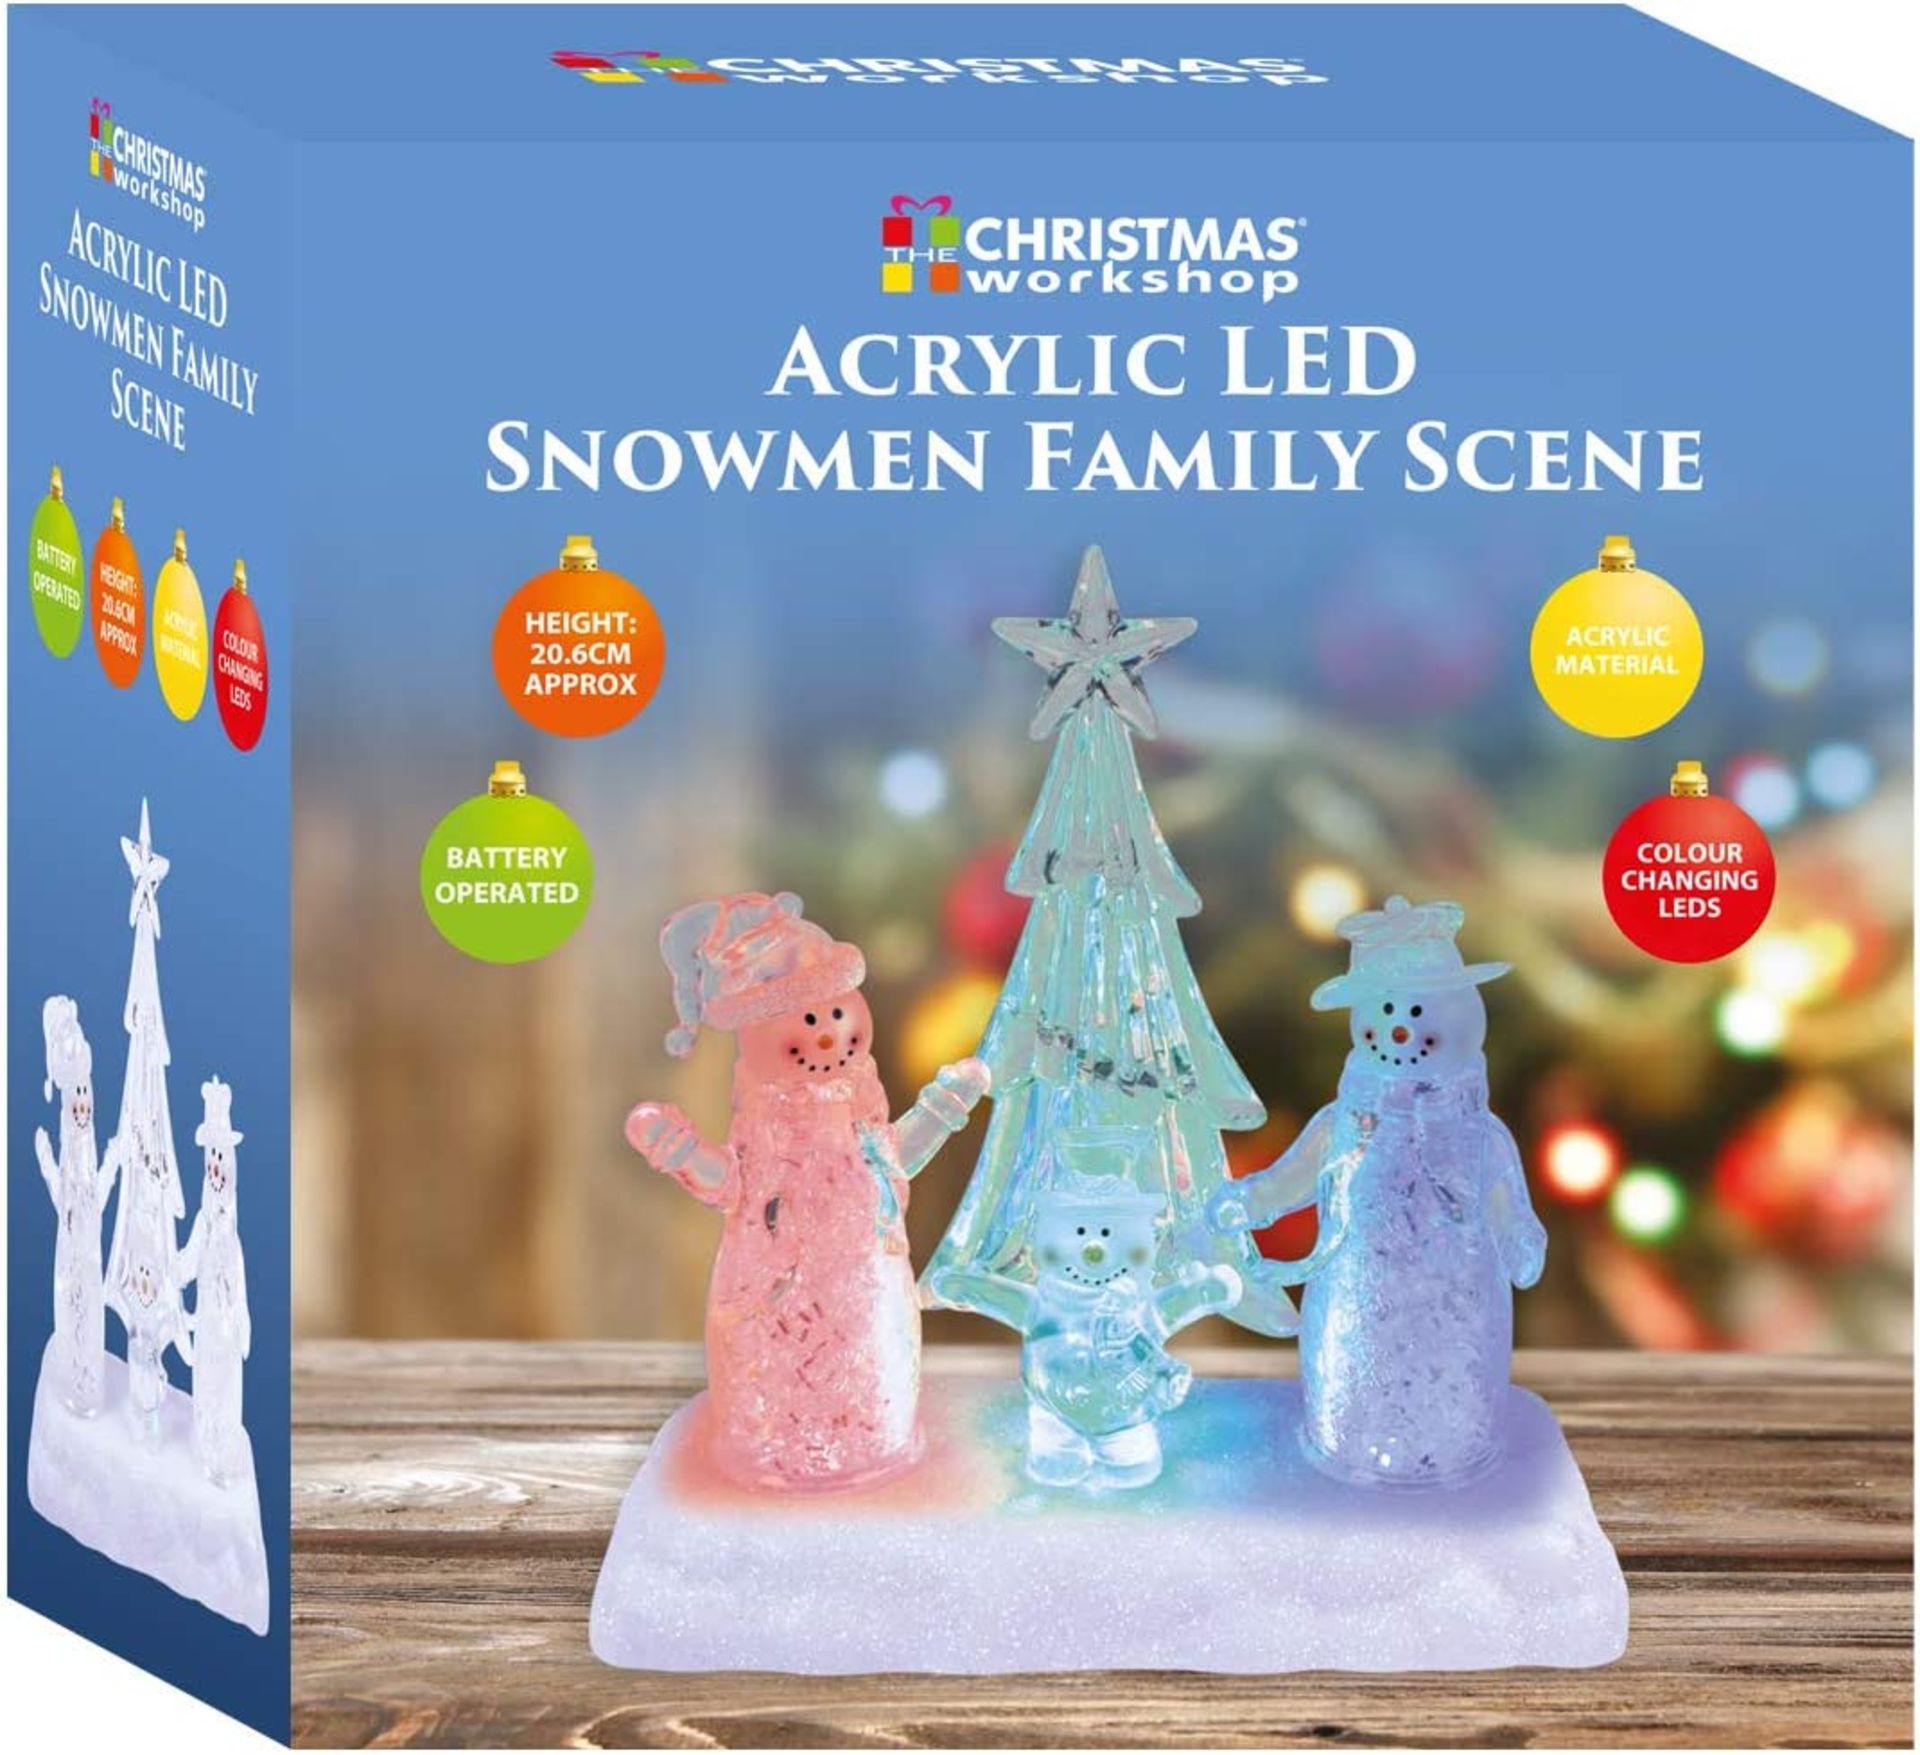 Christmas Workshop Acrylic Snowman Family Scene, Colour Changing LED Lights, Indoor